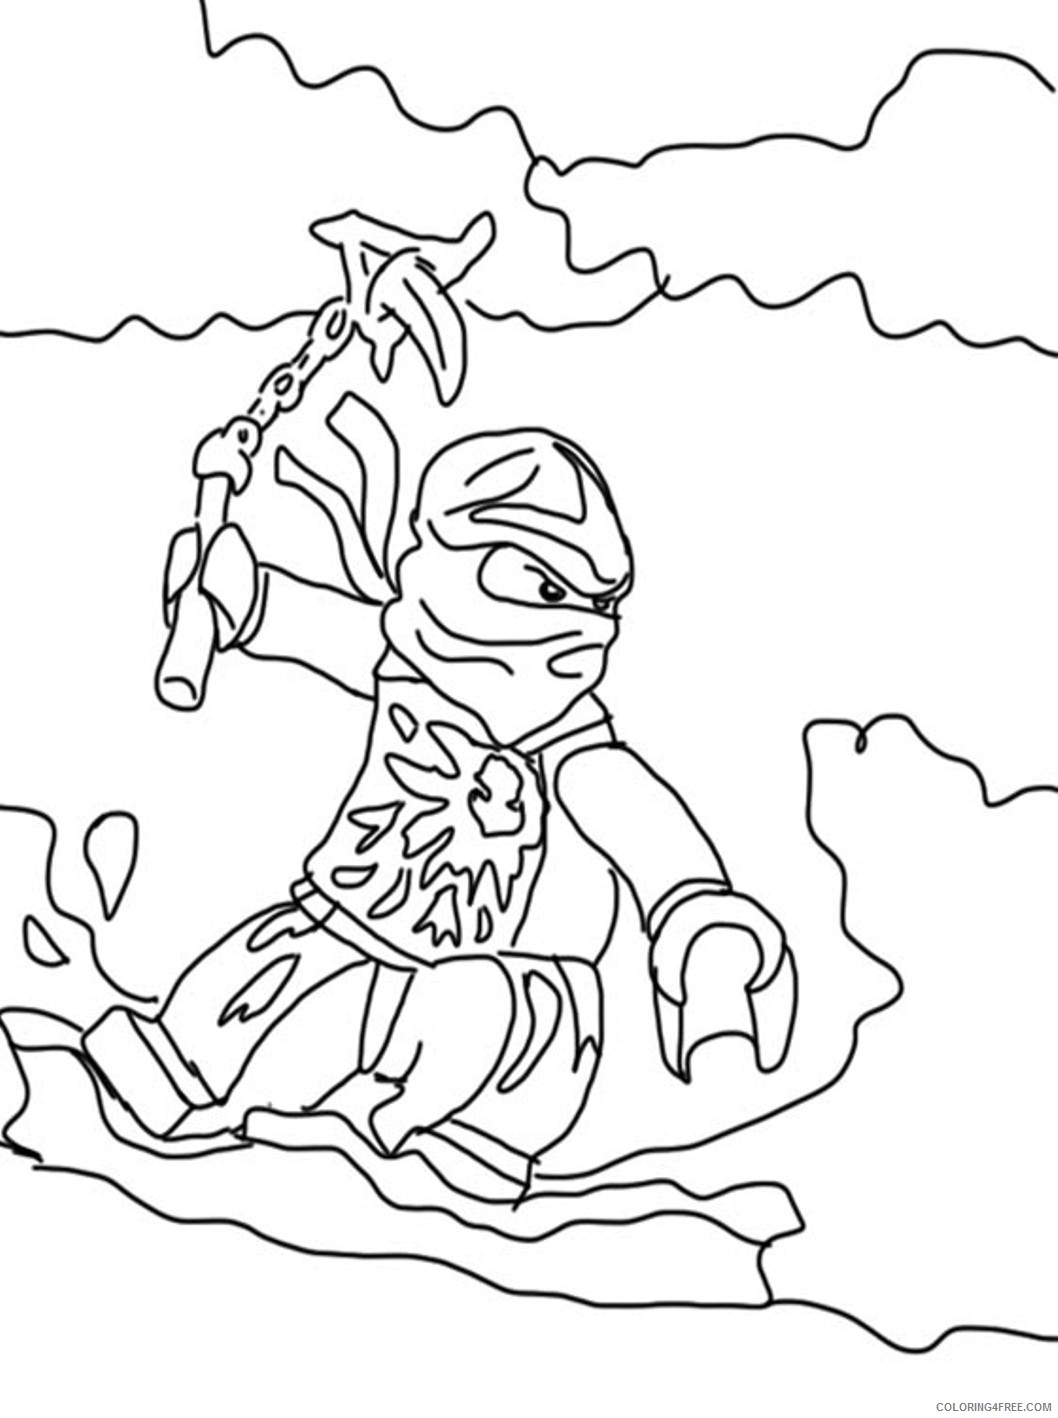 lego ninjago coloring pages for kids 2 Coloring4free